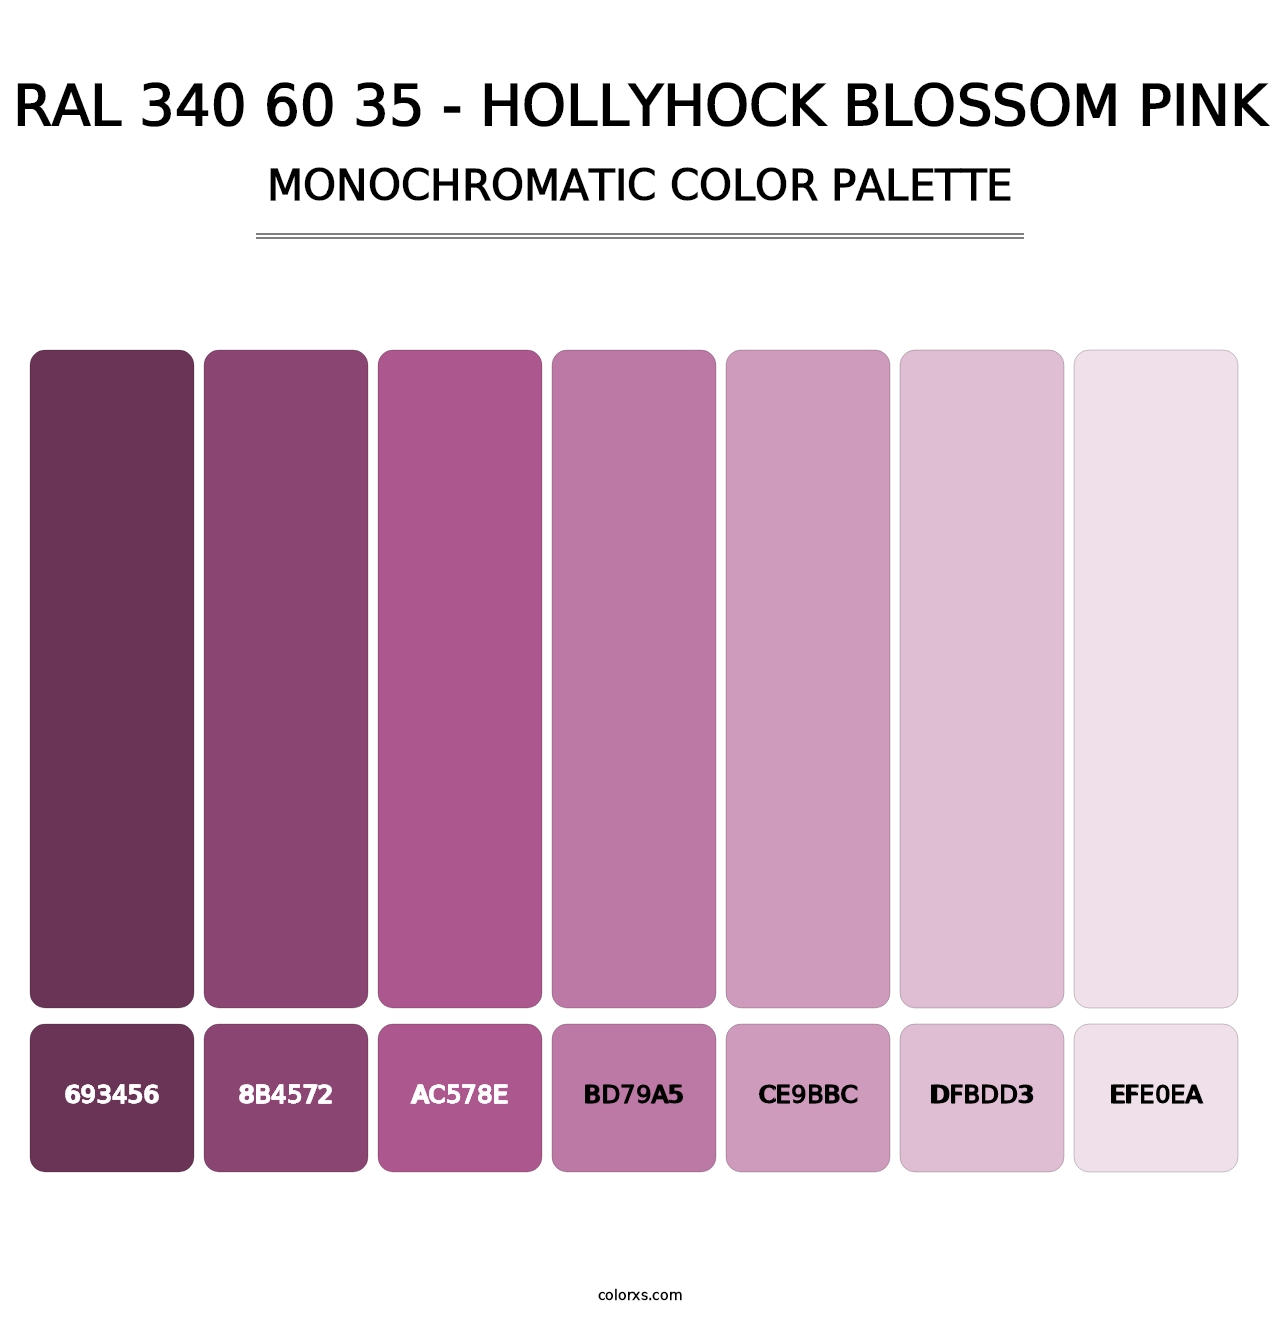 RAL 340 60 35 - Hollyhock Blossom Pink - Monochromatic Color Palette